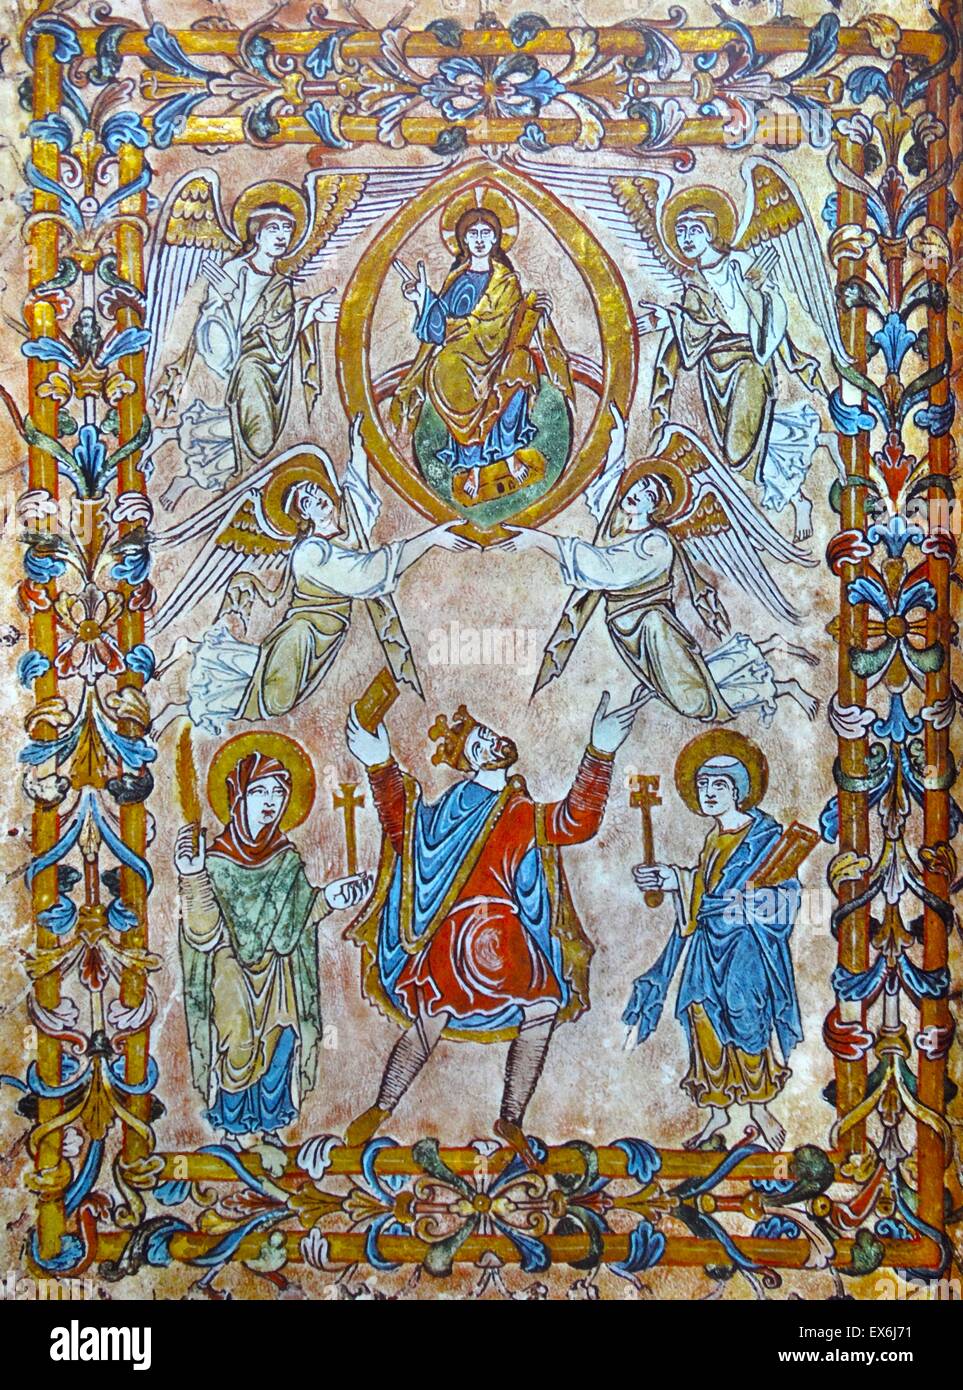 King Edgar offering the Charter of Westminster Abbey to Christ. The Virgin Mary and St. Peter flank the King. Taken from the eleventh-century Hyde Abbey Register. From The Island Race, a 20th century book that covers the history of the British Isles from Stock Photo